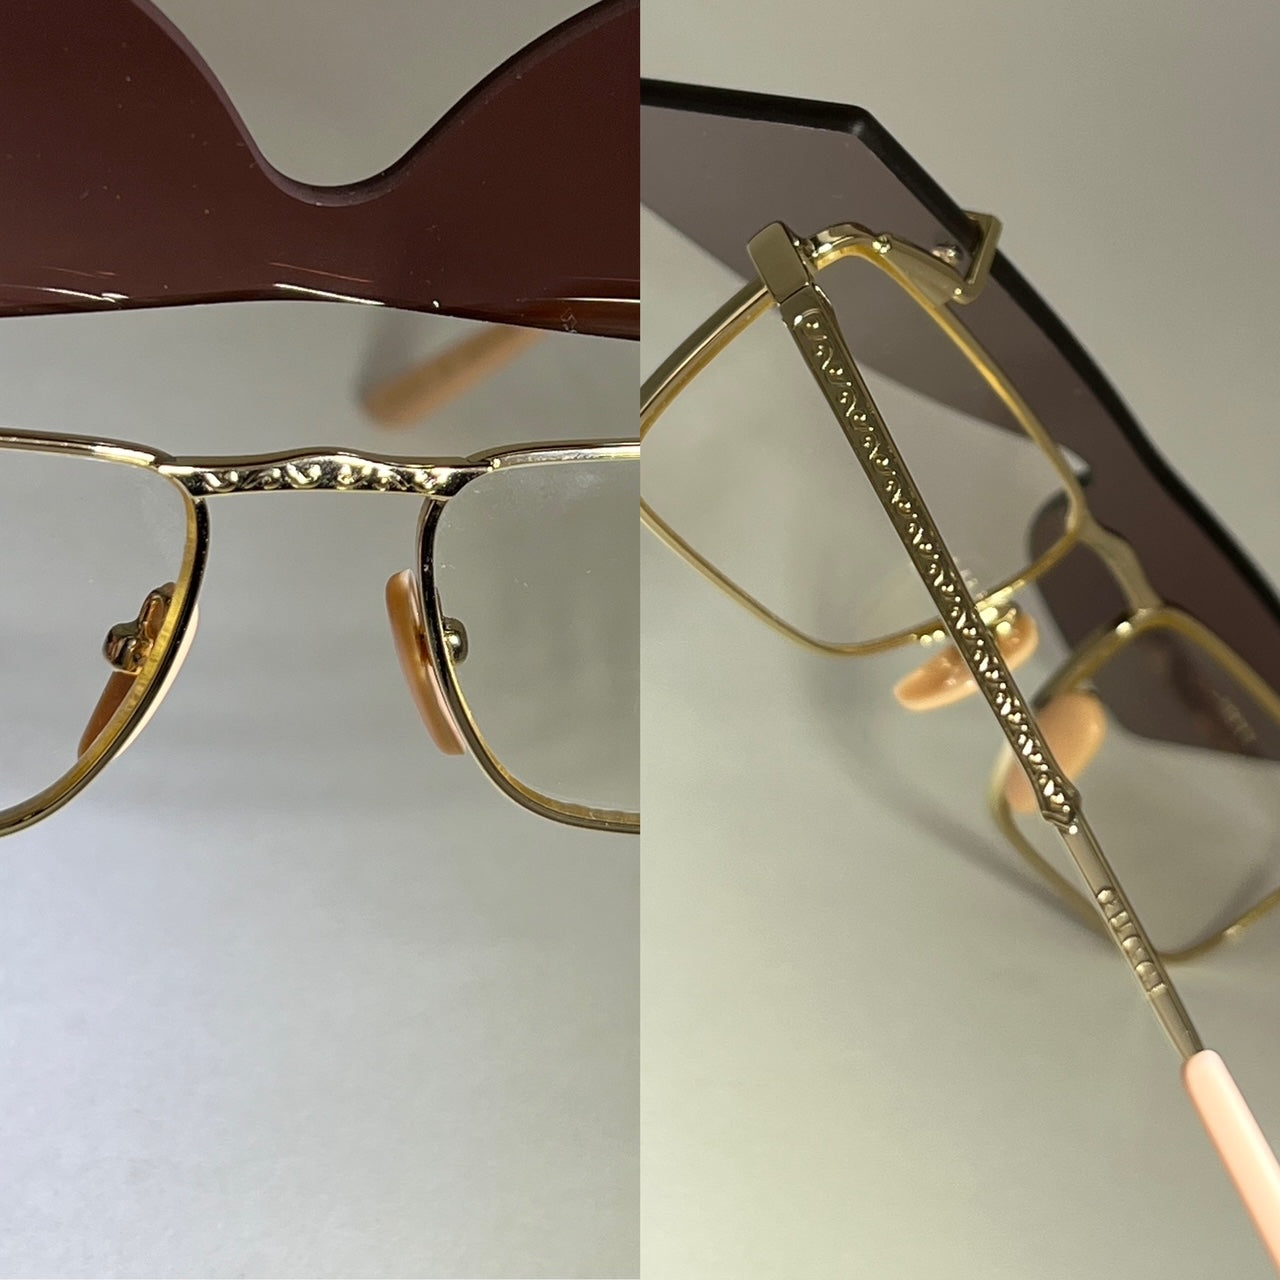 Gucci Flip-Up Sunglasses Rectangle Red Gold frames GG0363S 002 56 preowned